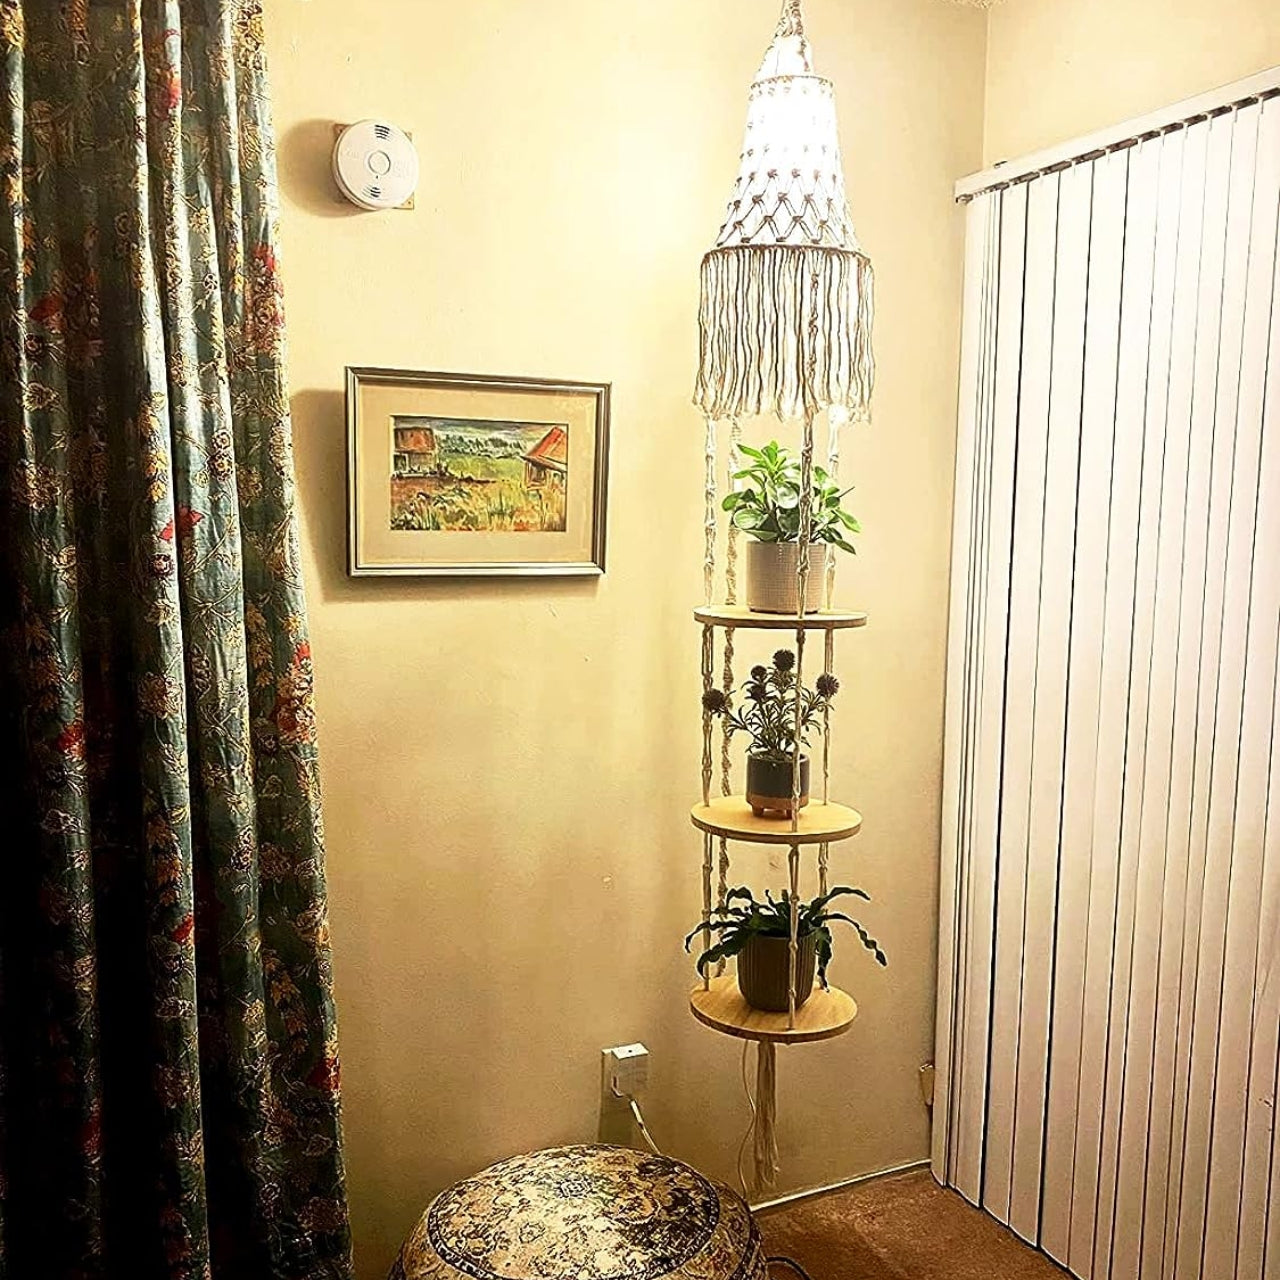 3 Tier Plant Hanger with Cotton Chandelier